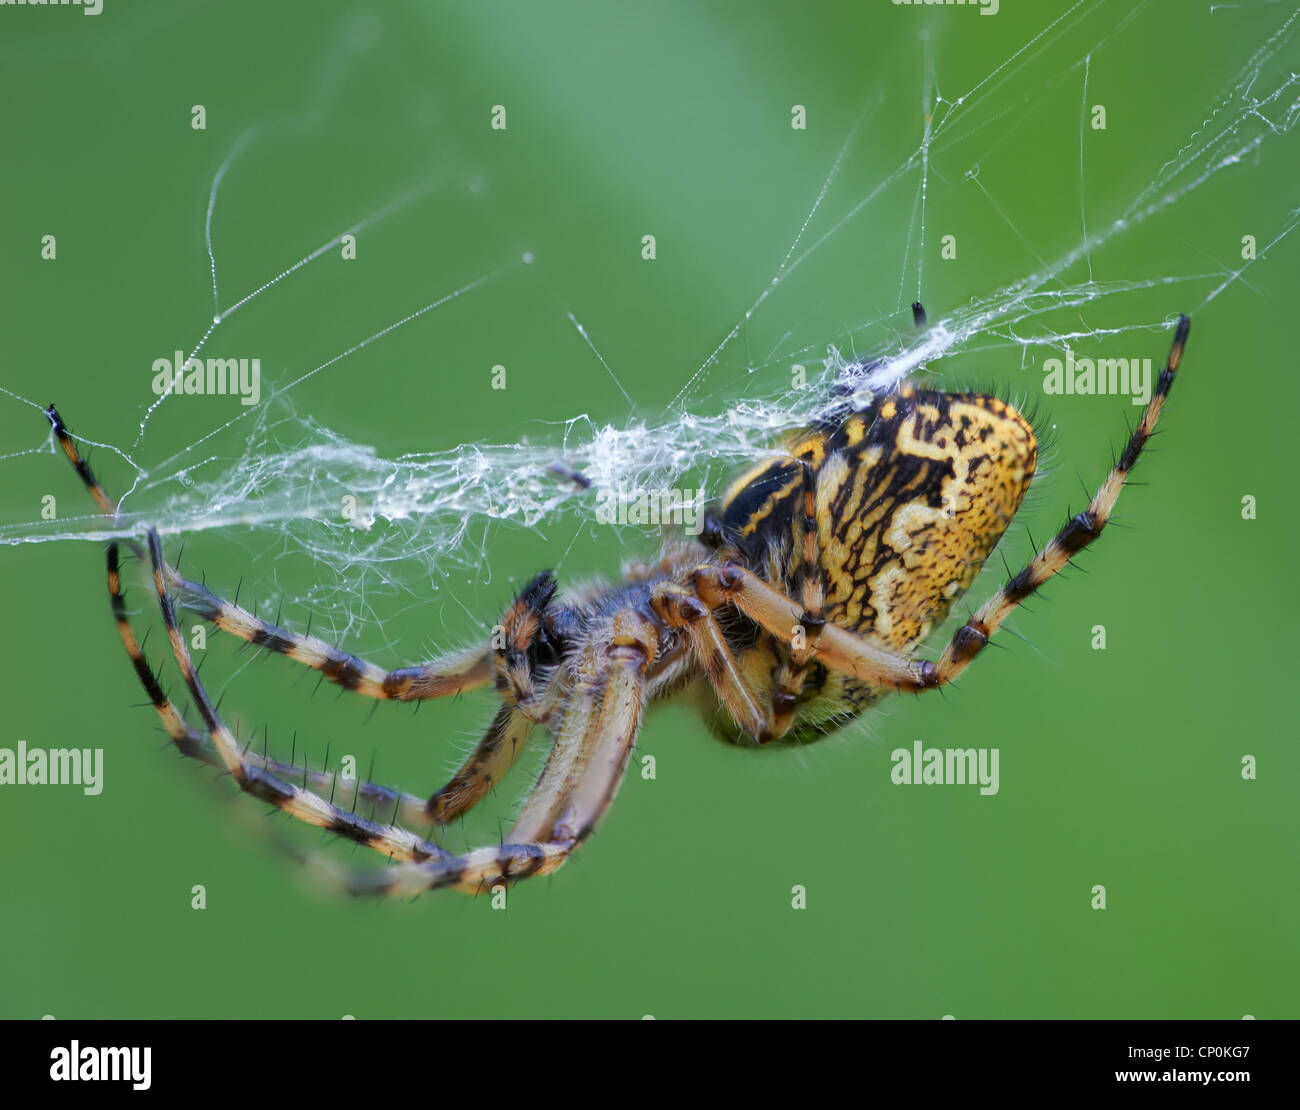 Spiders (order Araneae) are air-breathing arthropods that have eight legs and chelicerae with fangs that inject venom. Stock Photo